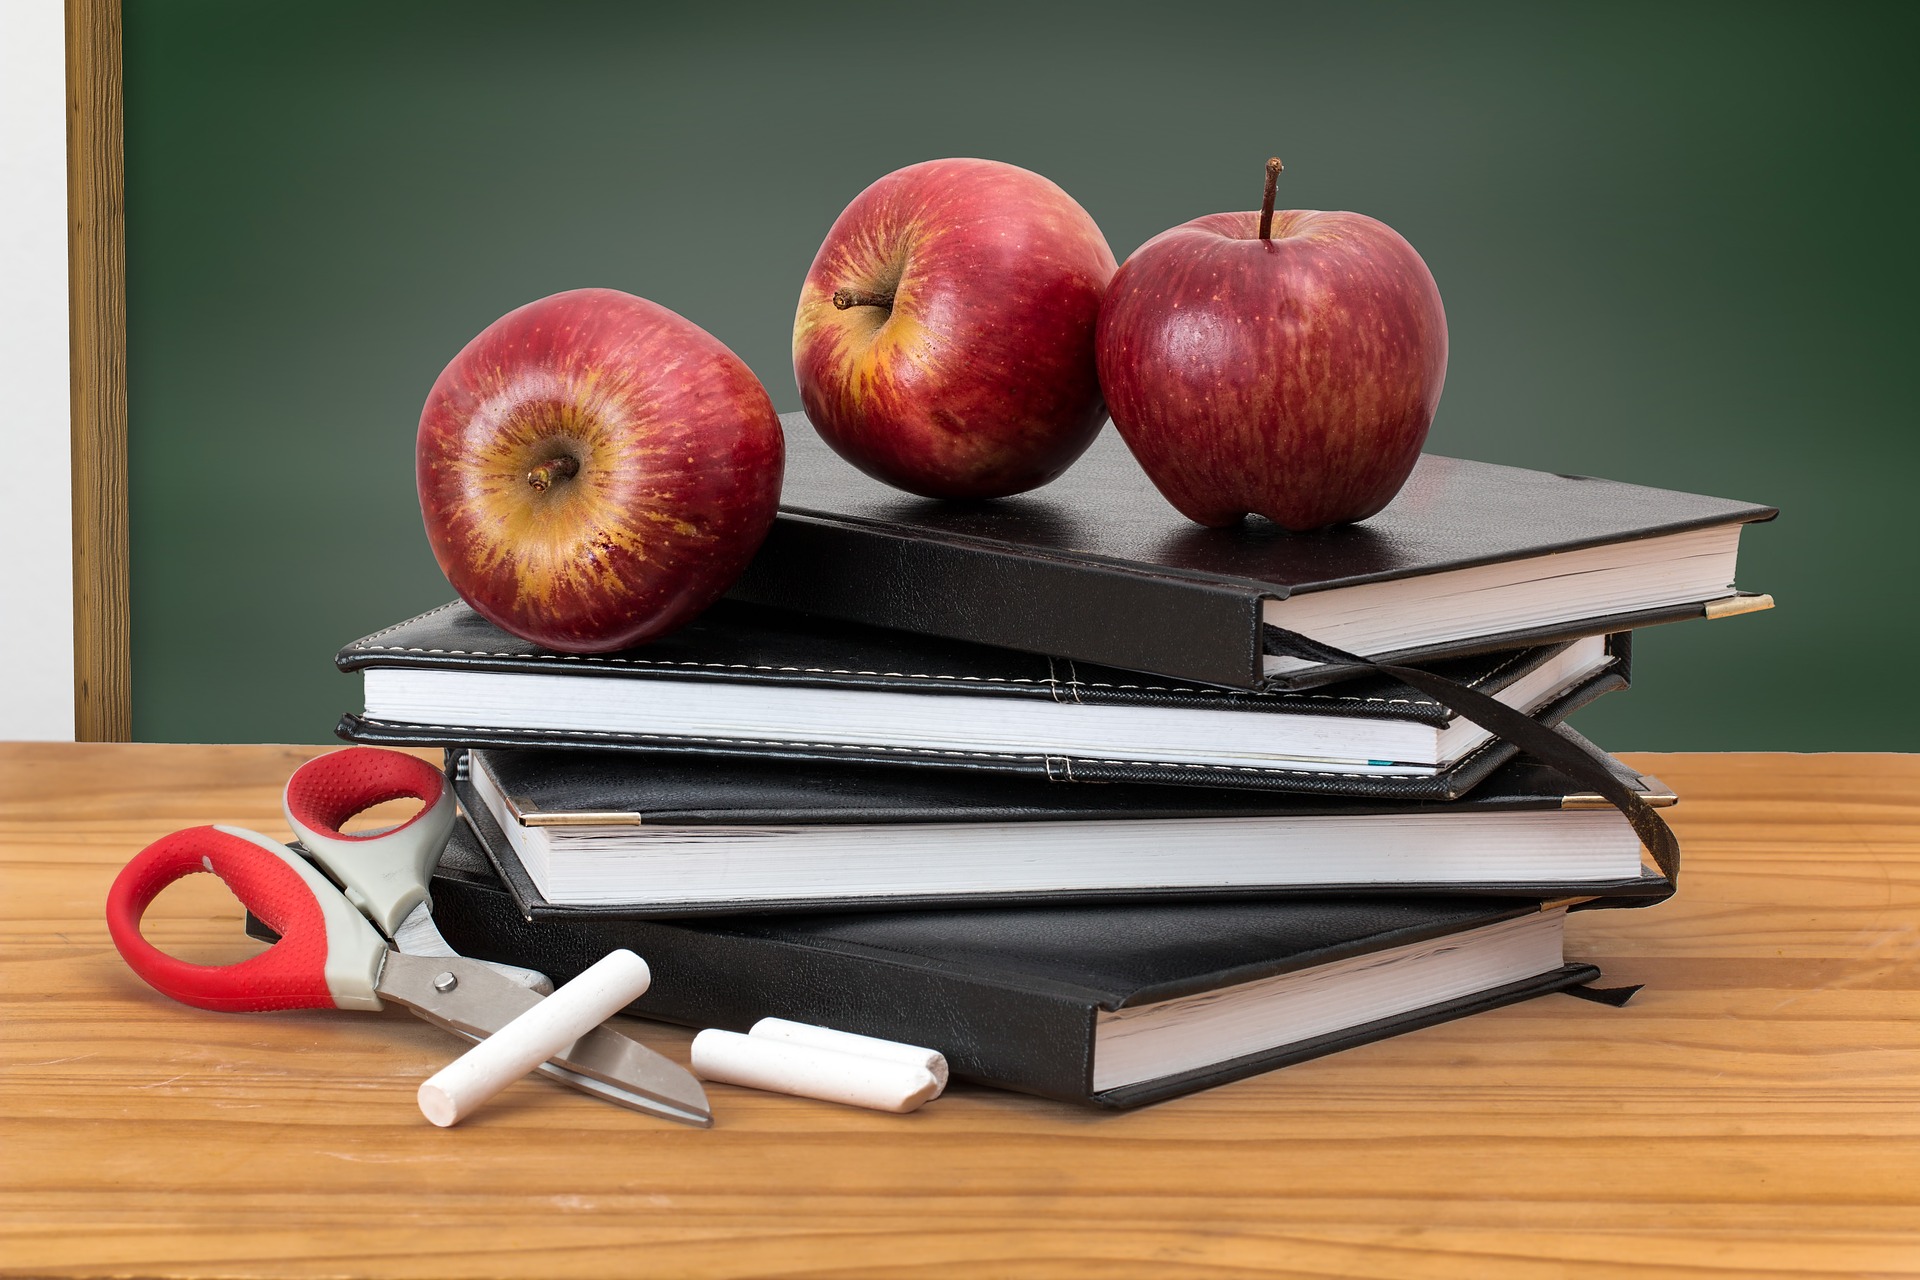 Healthy eating in schools: apples and schol books